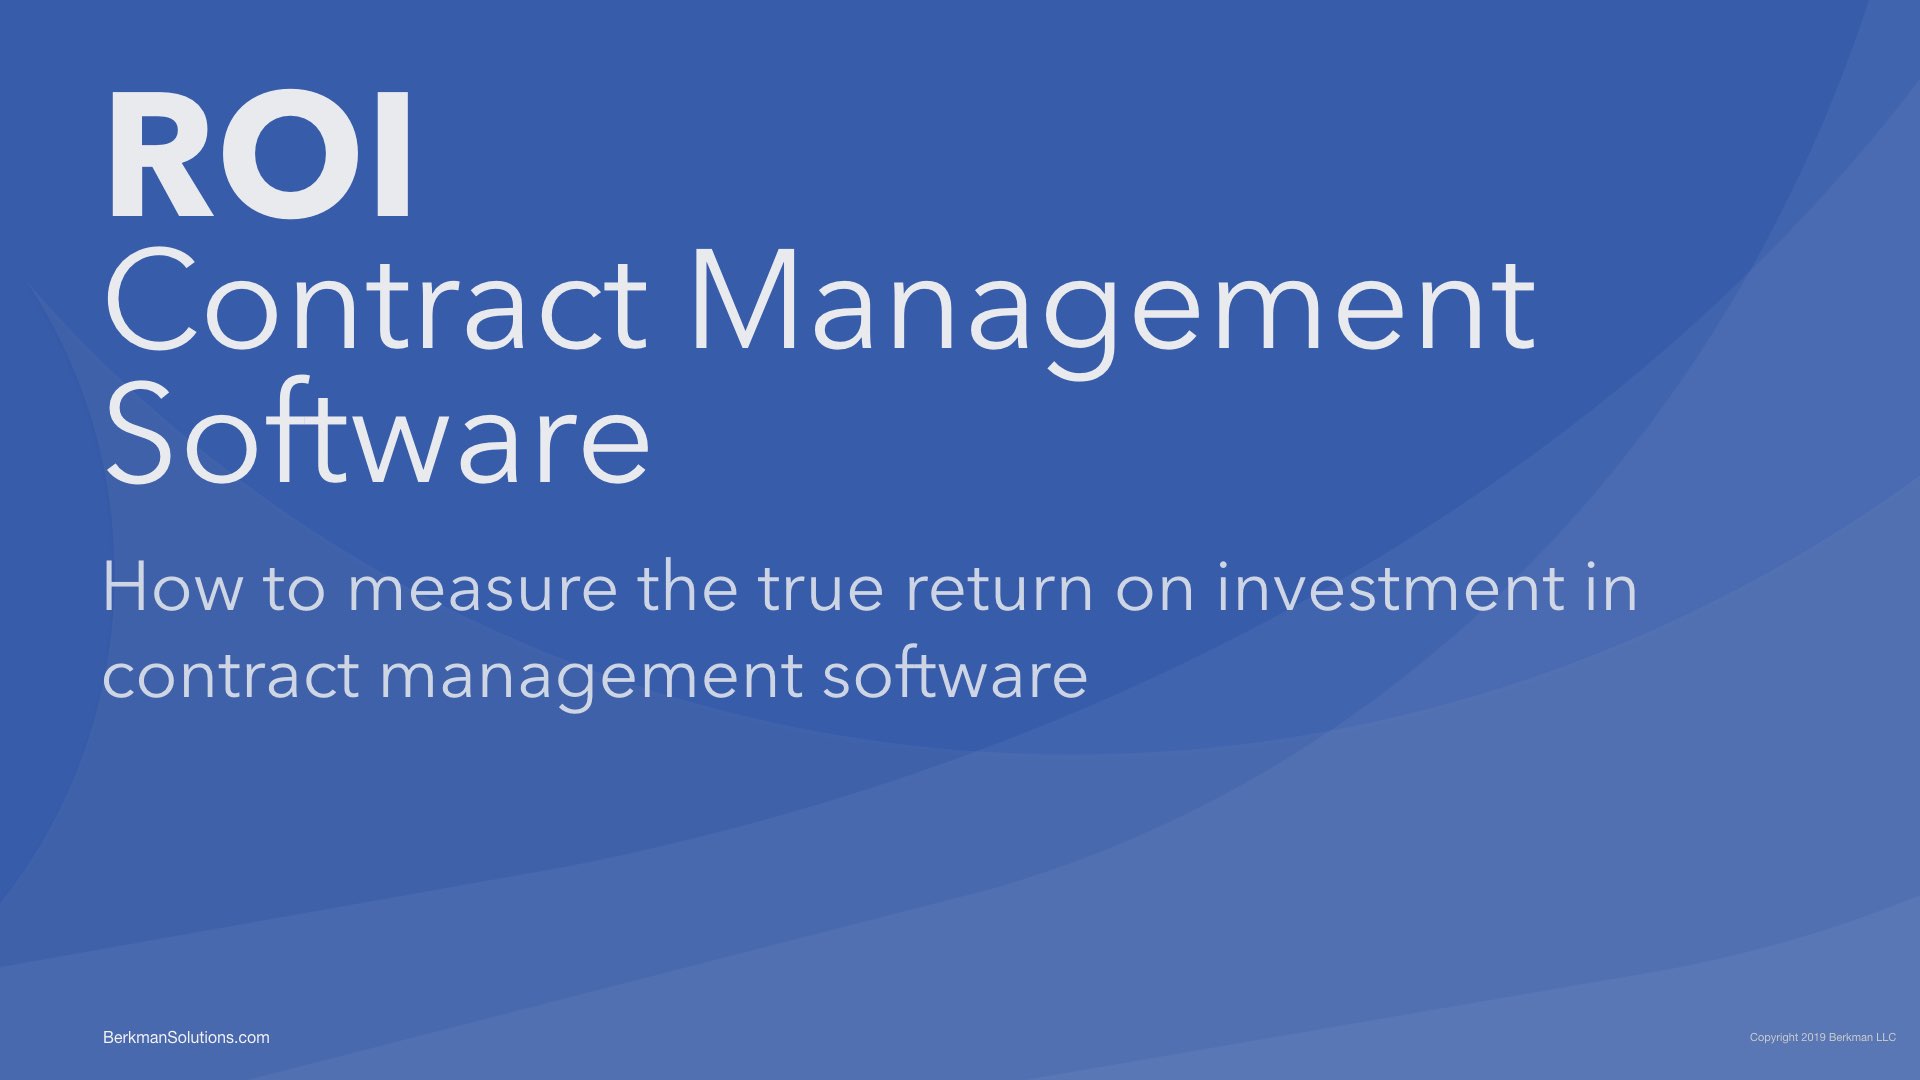 Return on Investment in Contract Management Software